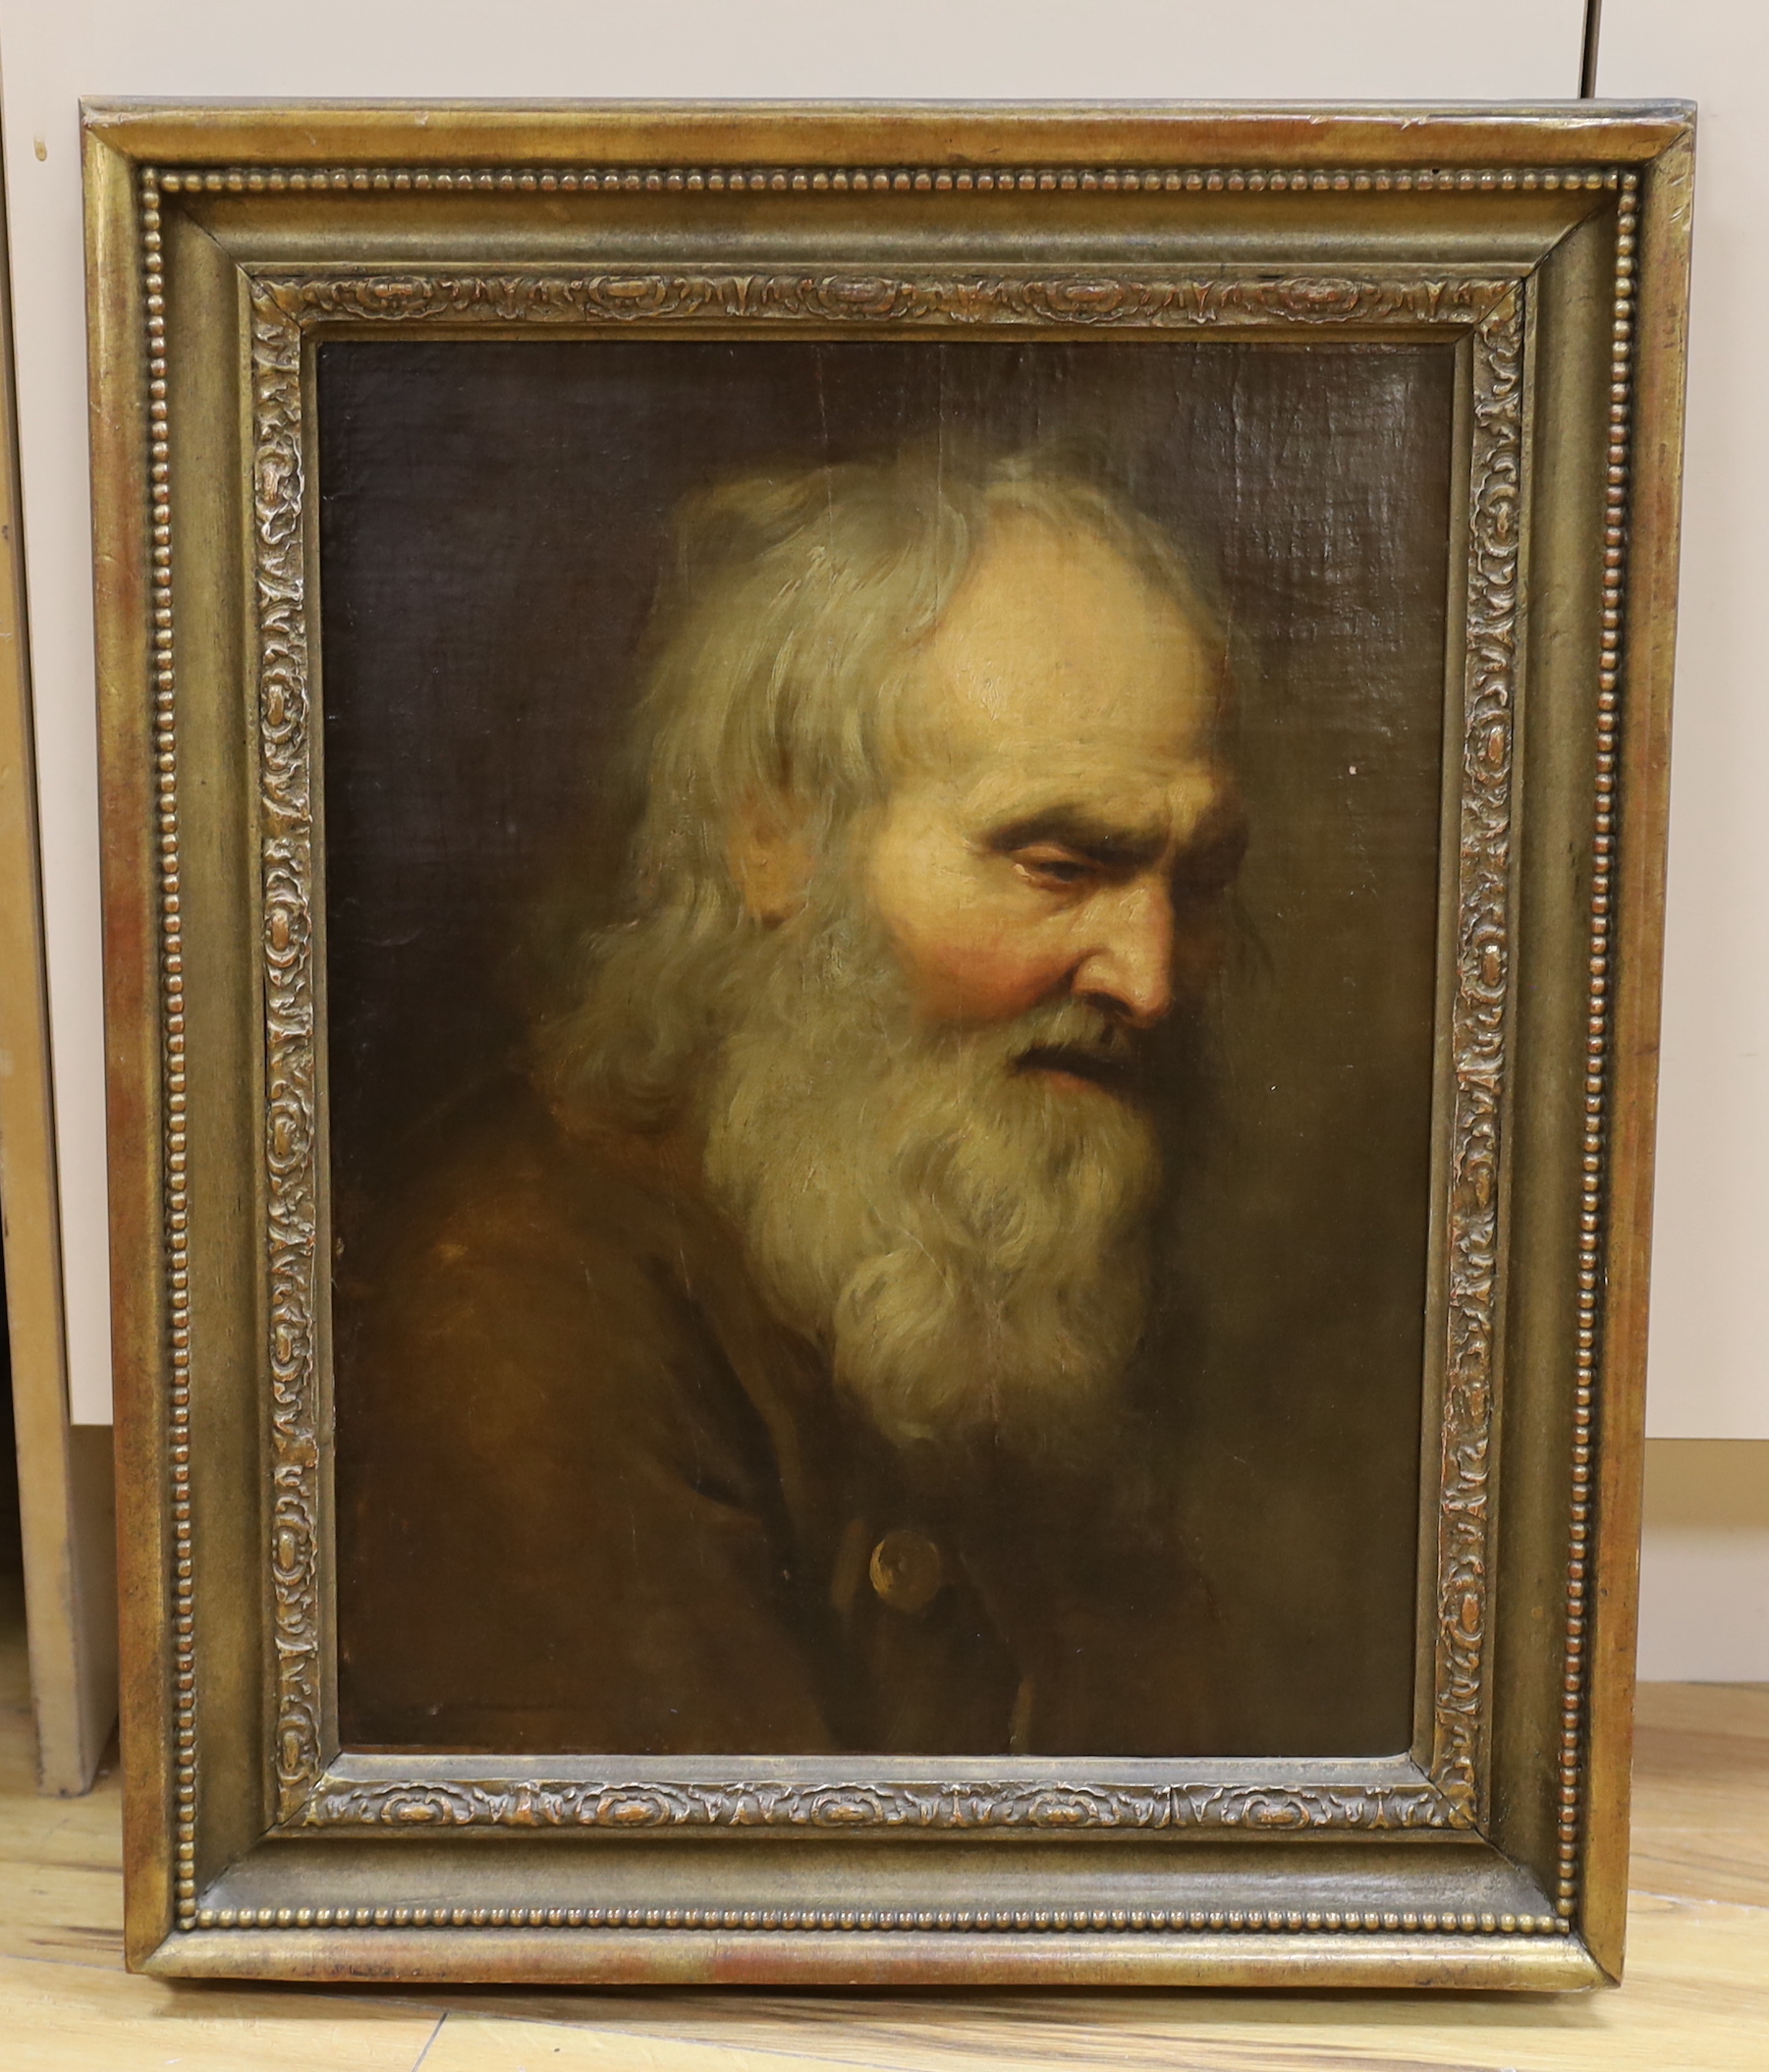 Manner of Nicaise De Keyser (Flemish, 1713-1887), early 19th century oil on canvas, Portrait of an old bearded man, inscribed verso, 46 x 36cm